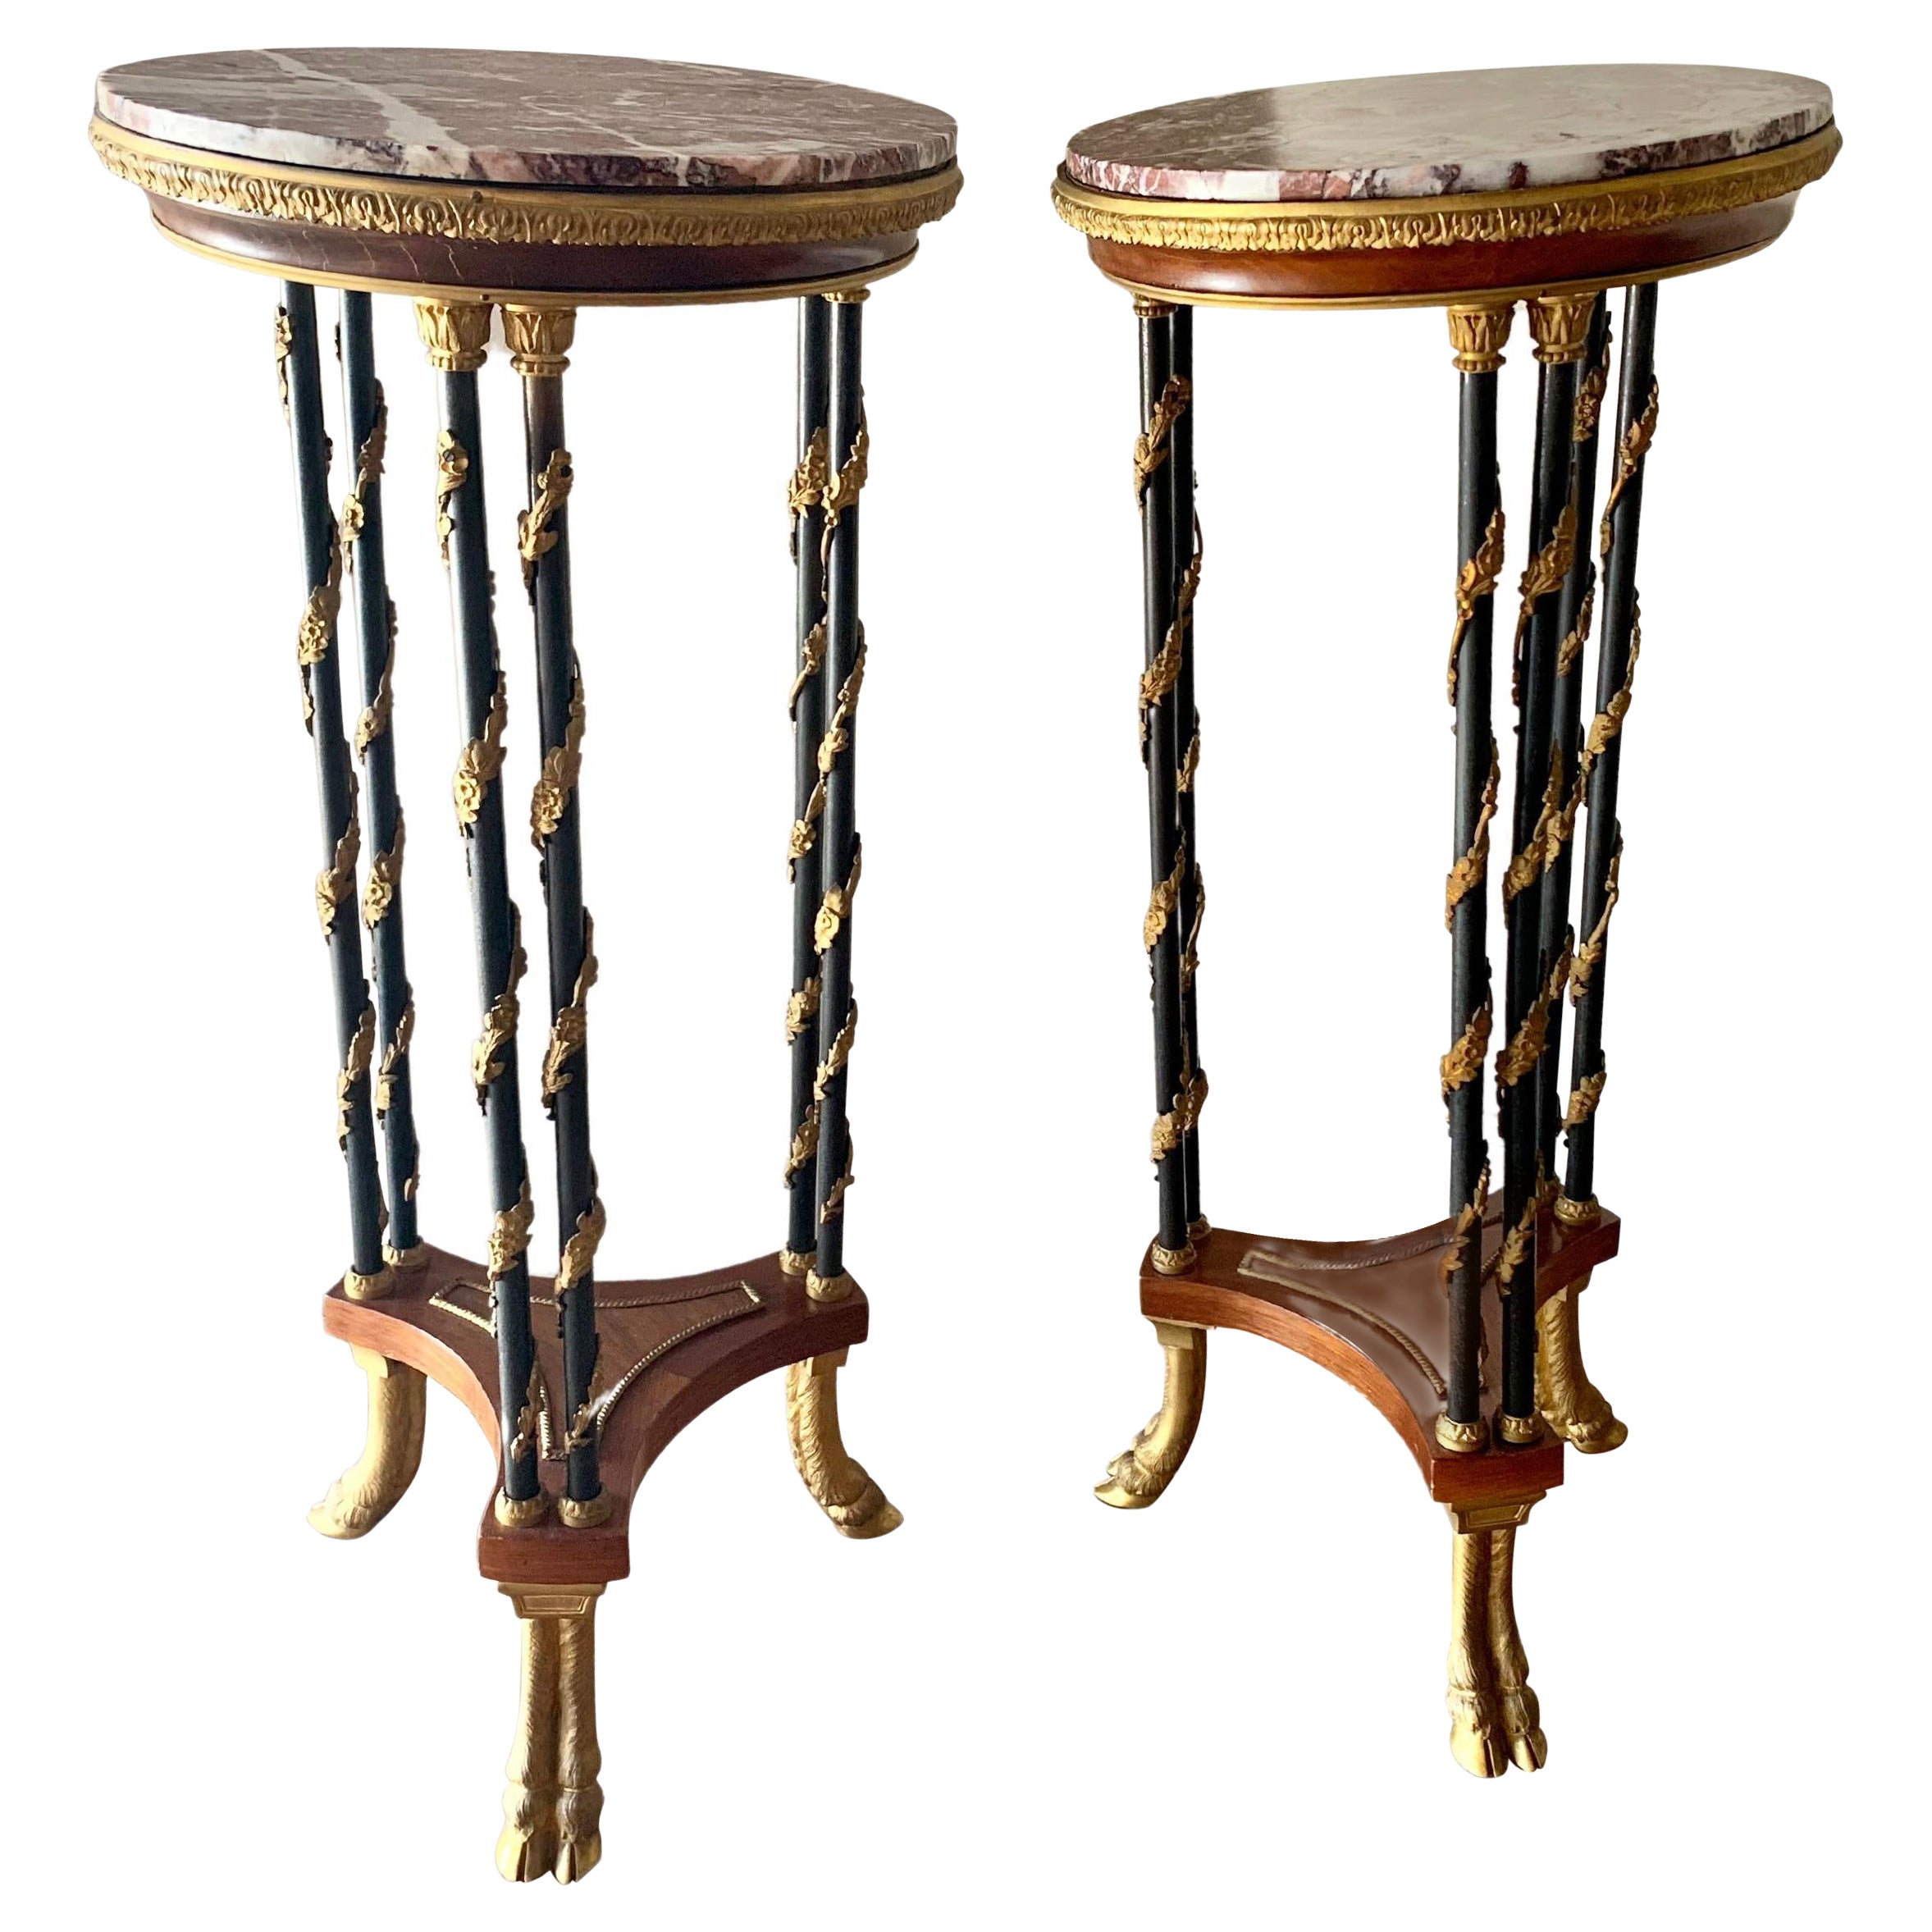 Whismical pair of gueridon in ormolu bronze with marble, this pair can be attributed to henry dasson famous cabinet maker. This model with the bronze that suuounds the feet is very rare on the market.